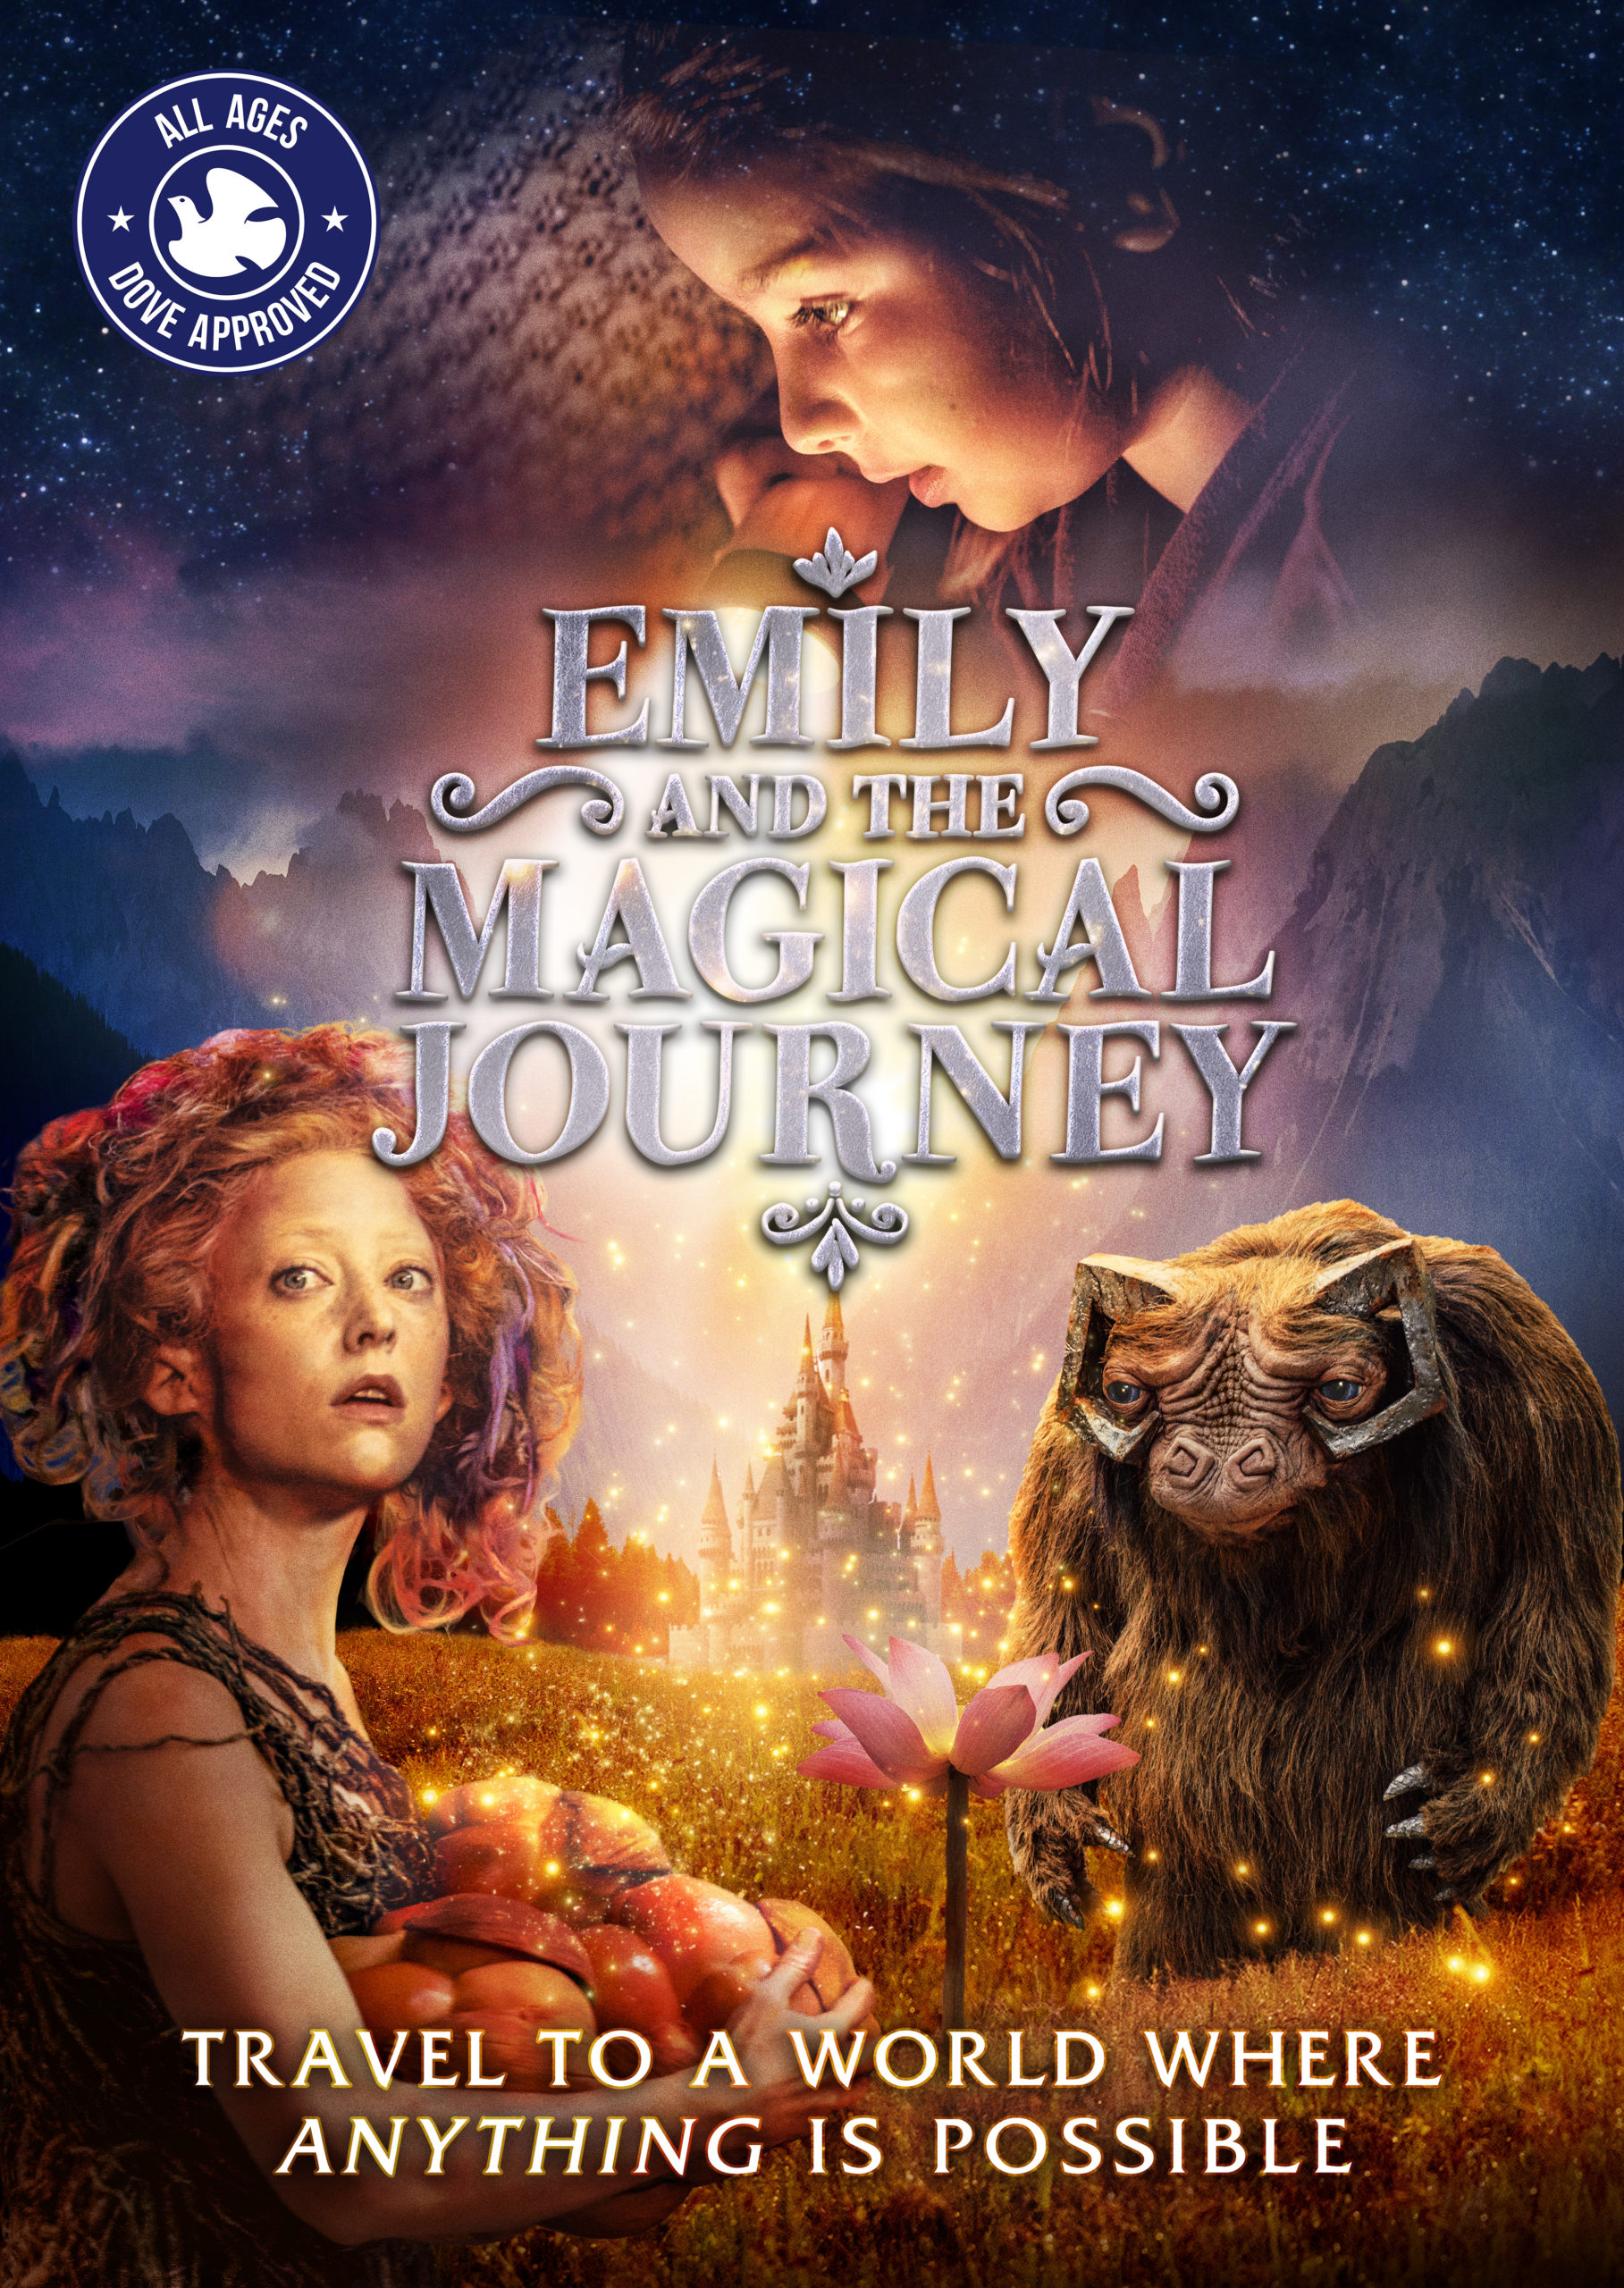 emily and the magical journey cast